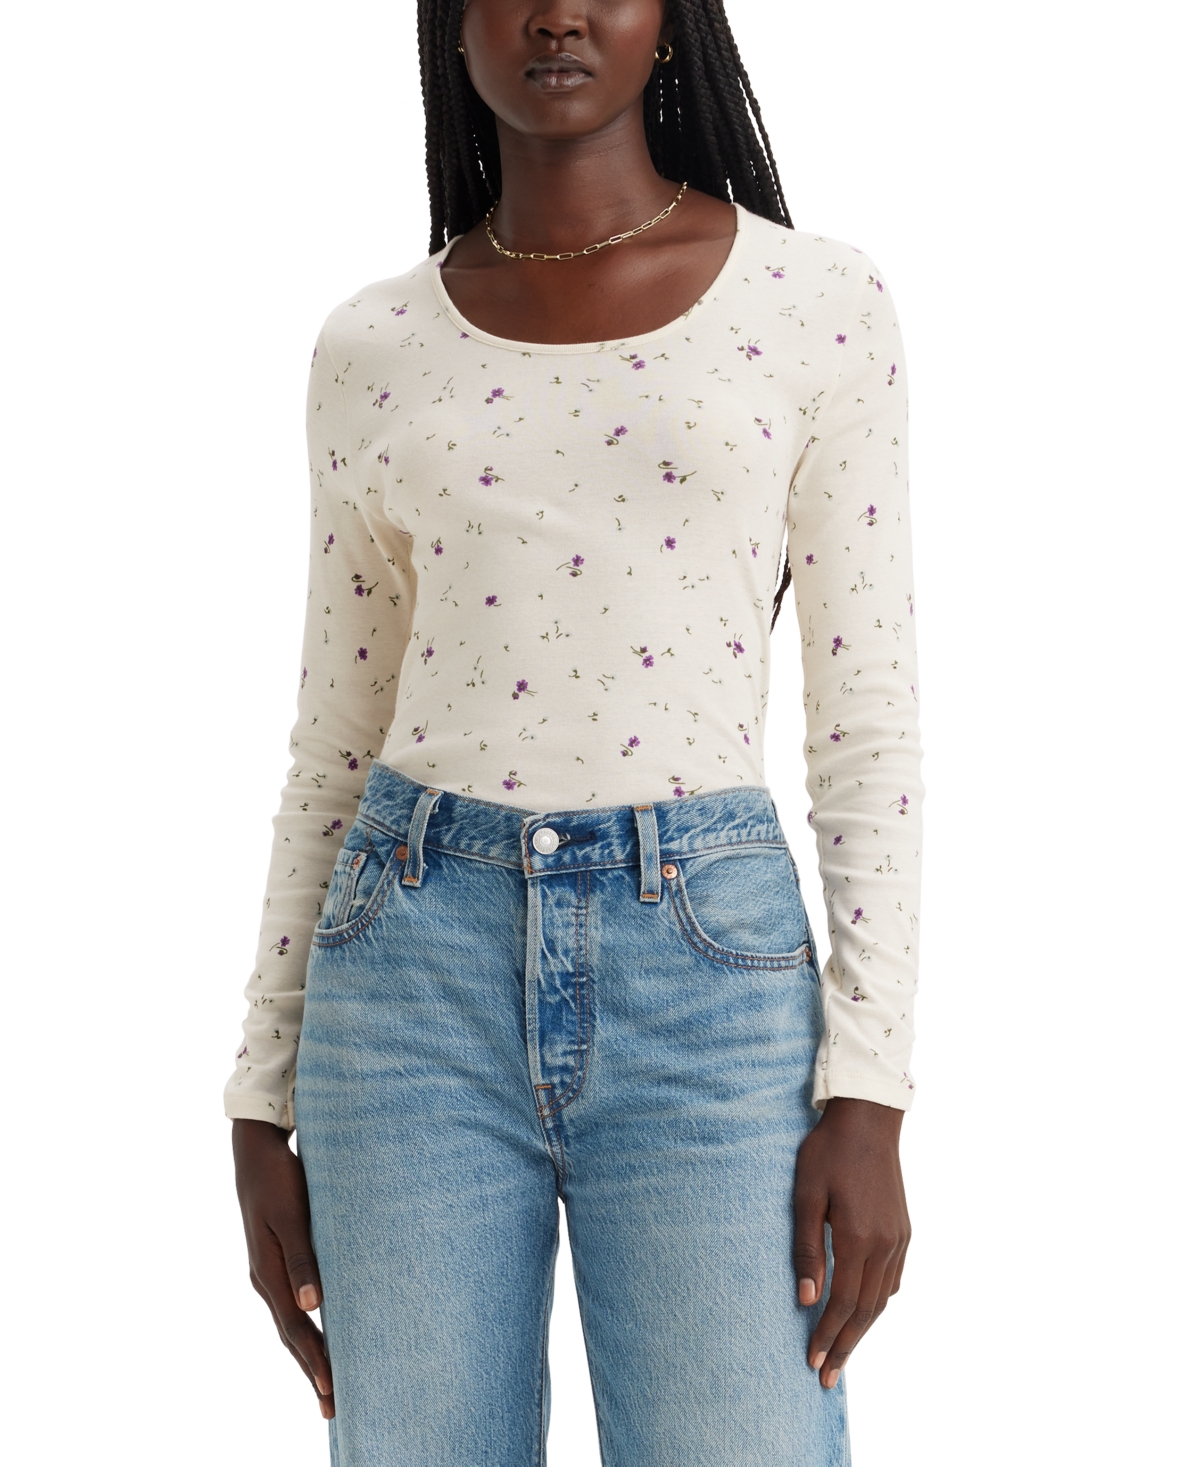 Levi's Women's Infinity Cotton Long-sleeve Ballet Top In Kitty Floral Sunny Cream